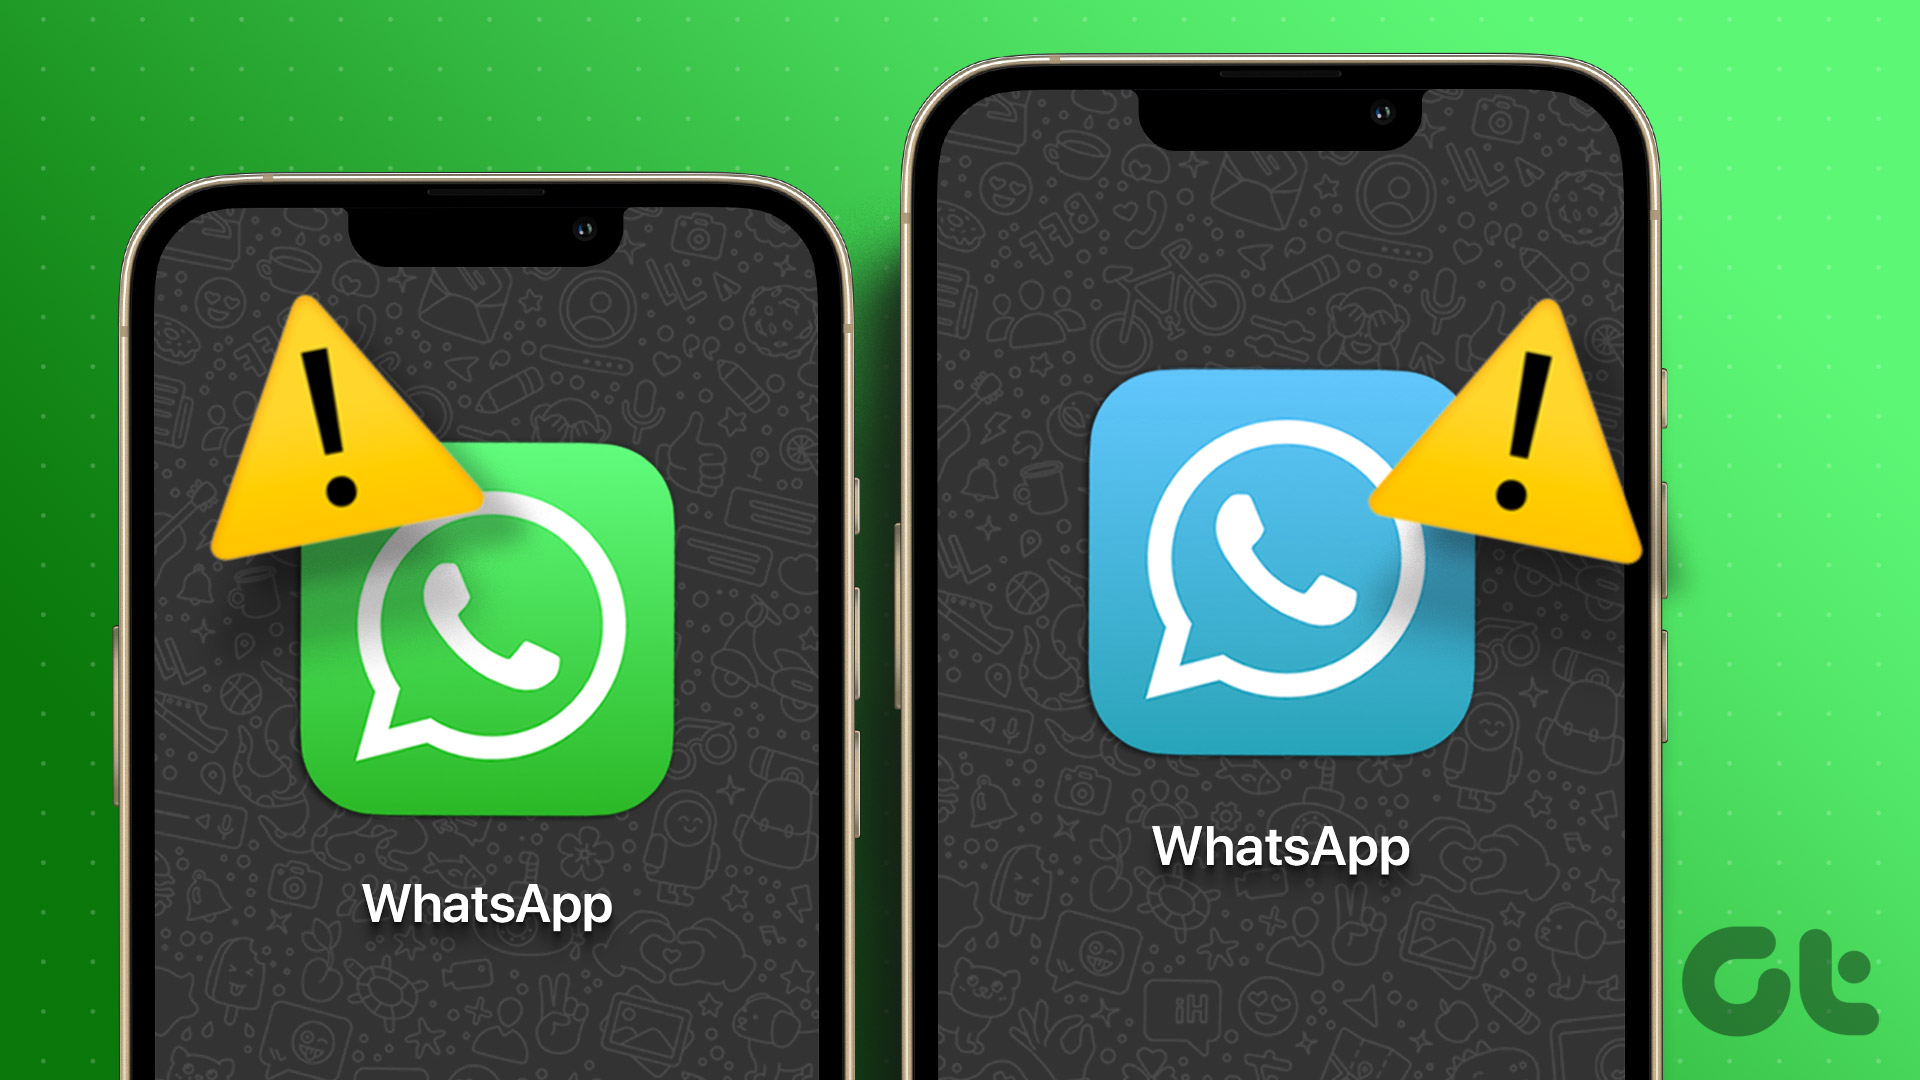 Unable to Use WhatsApp on Two Devices